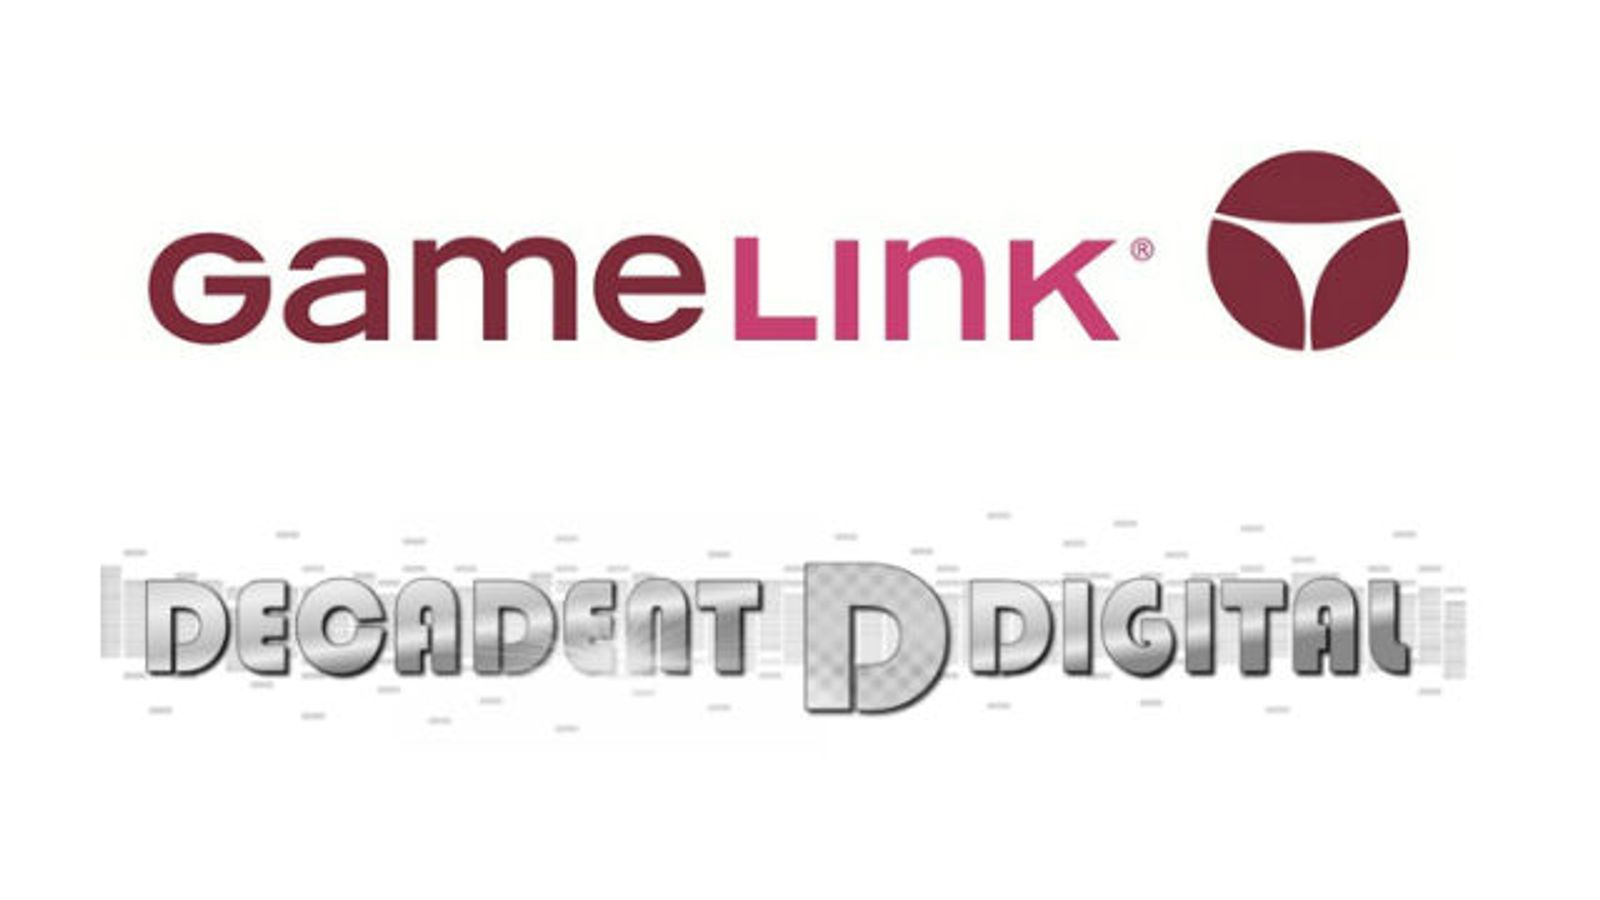 GameLink to Carry Both New & Classic Titles from Decadent D Digital